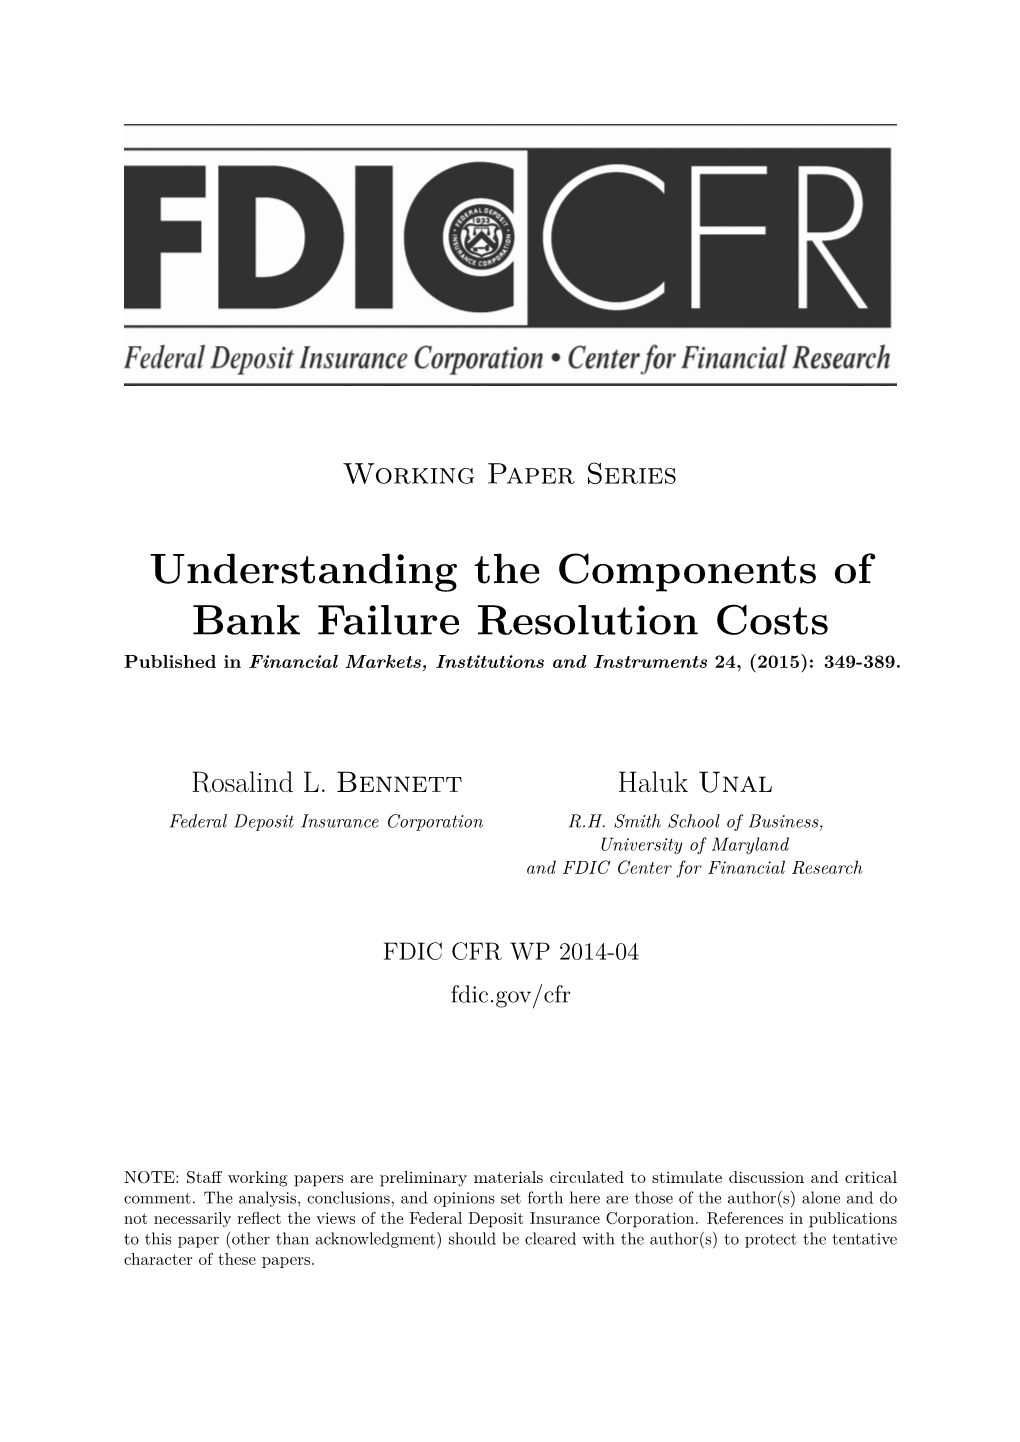 Understanding the Components of Bank Failure Resolution Costs Published in Financial Markets, Institutions and Instruments 24, (2015): 349-389